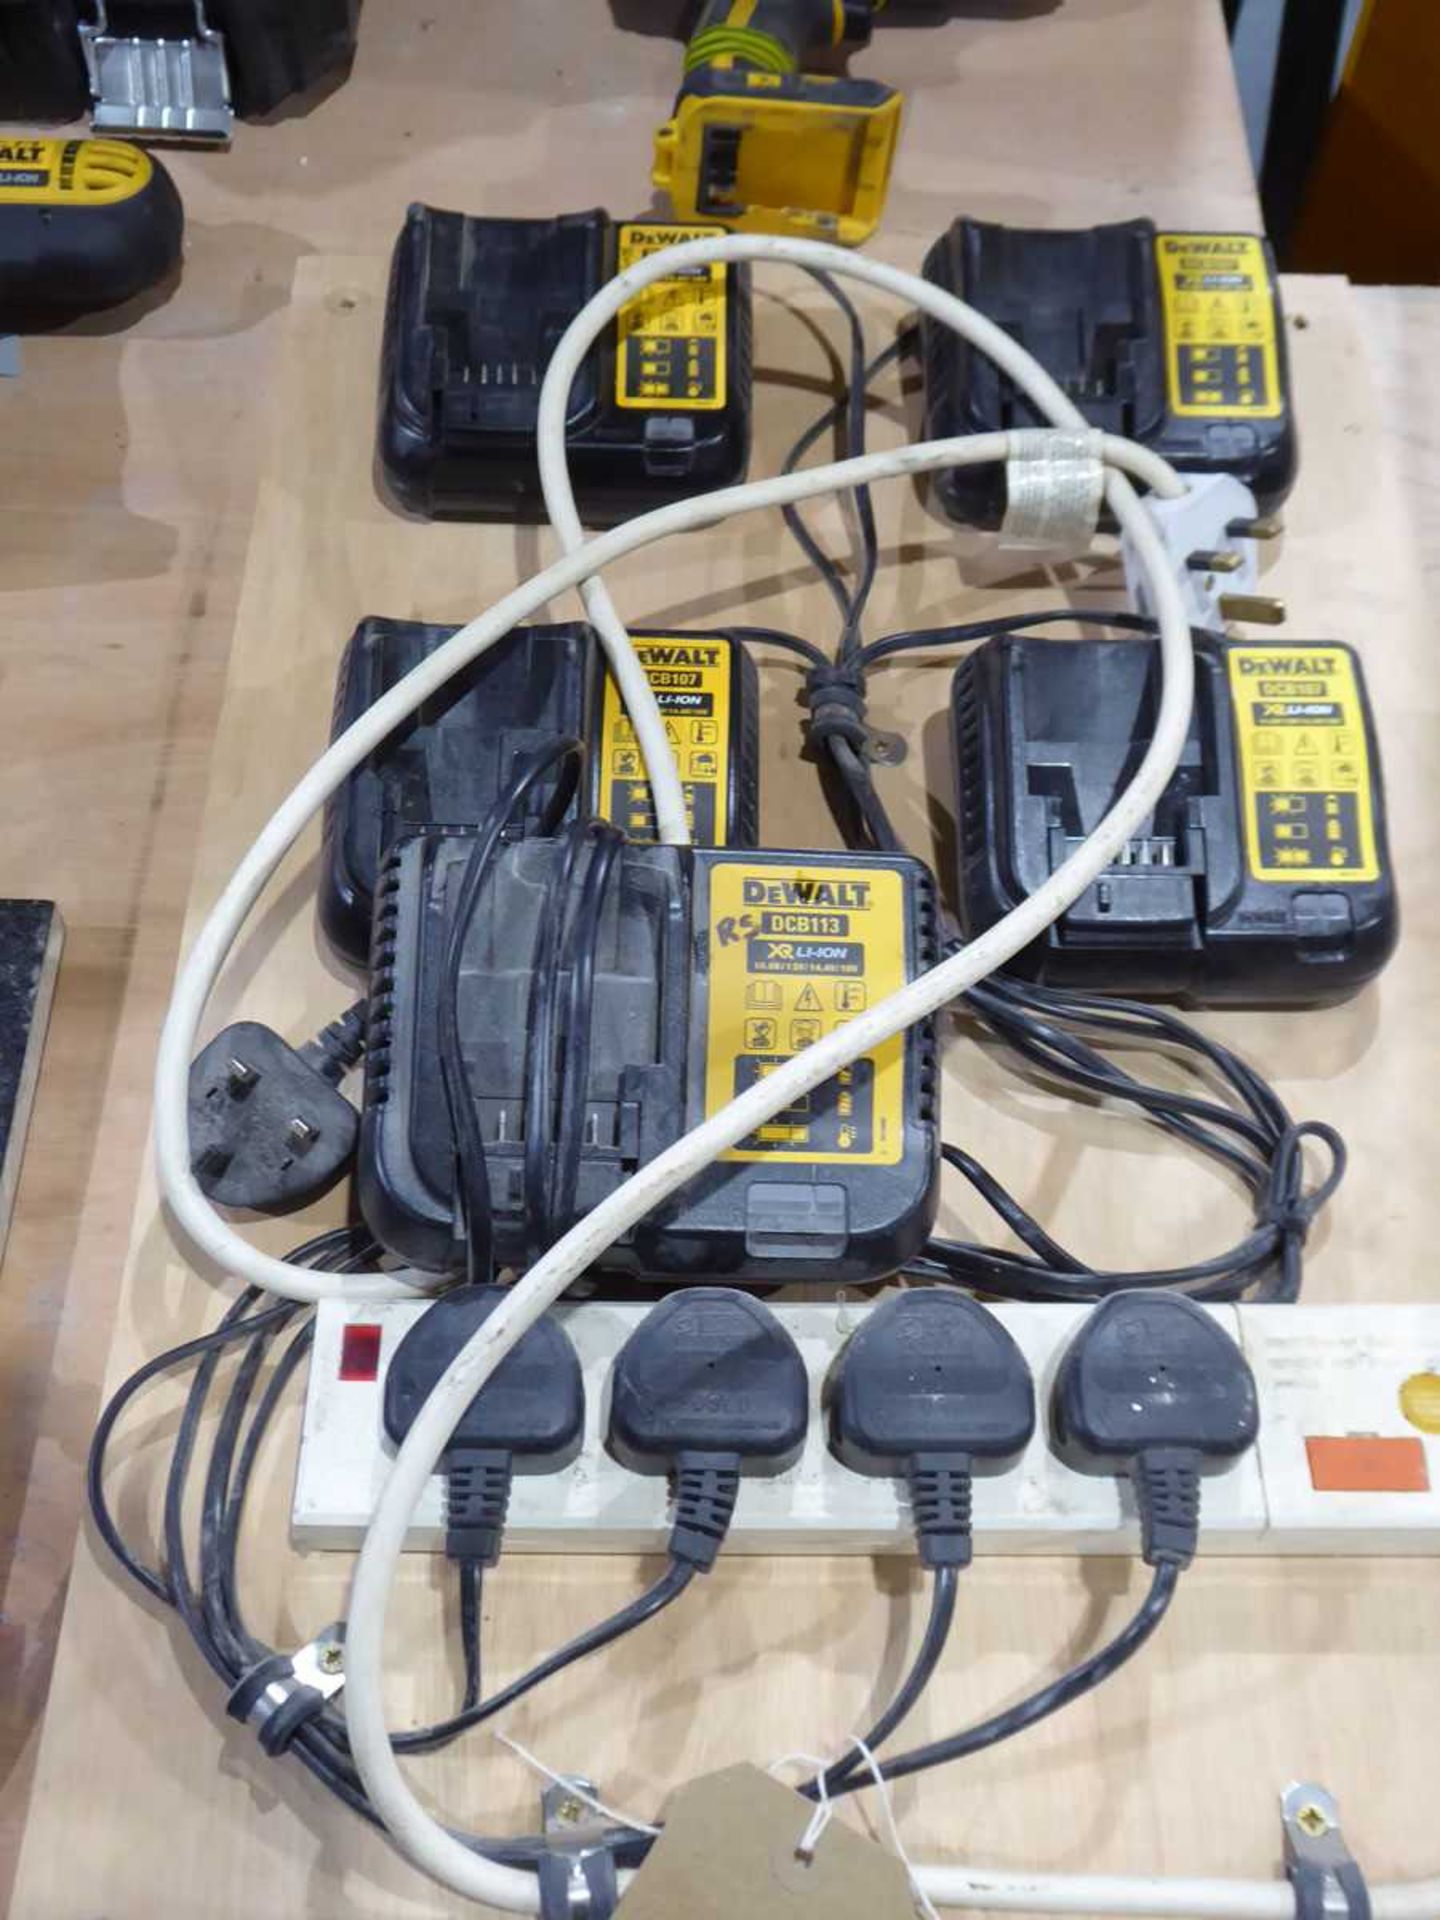 +VAT 3 x DeWalt cordless drill drivers together with 2 x cases and a re-charging station - Image 2 of 2